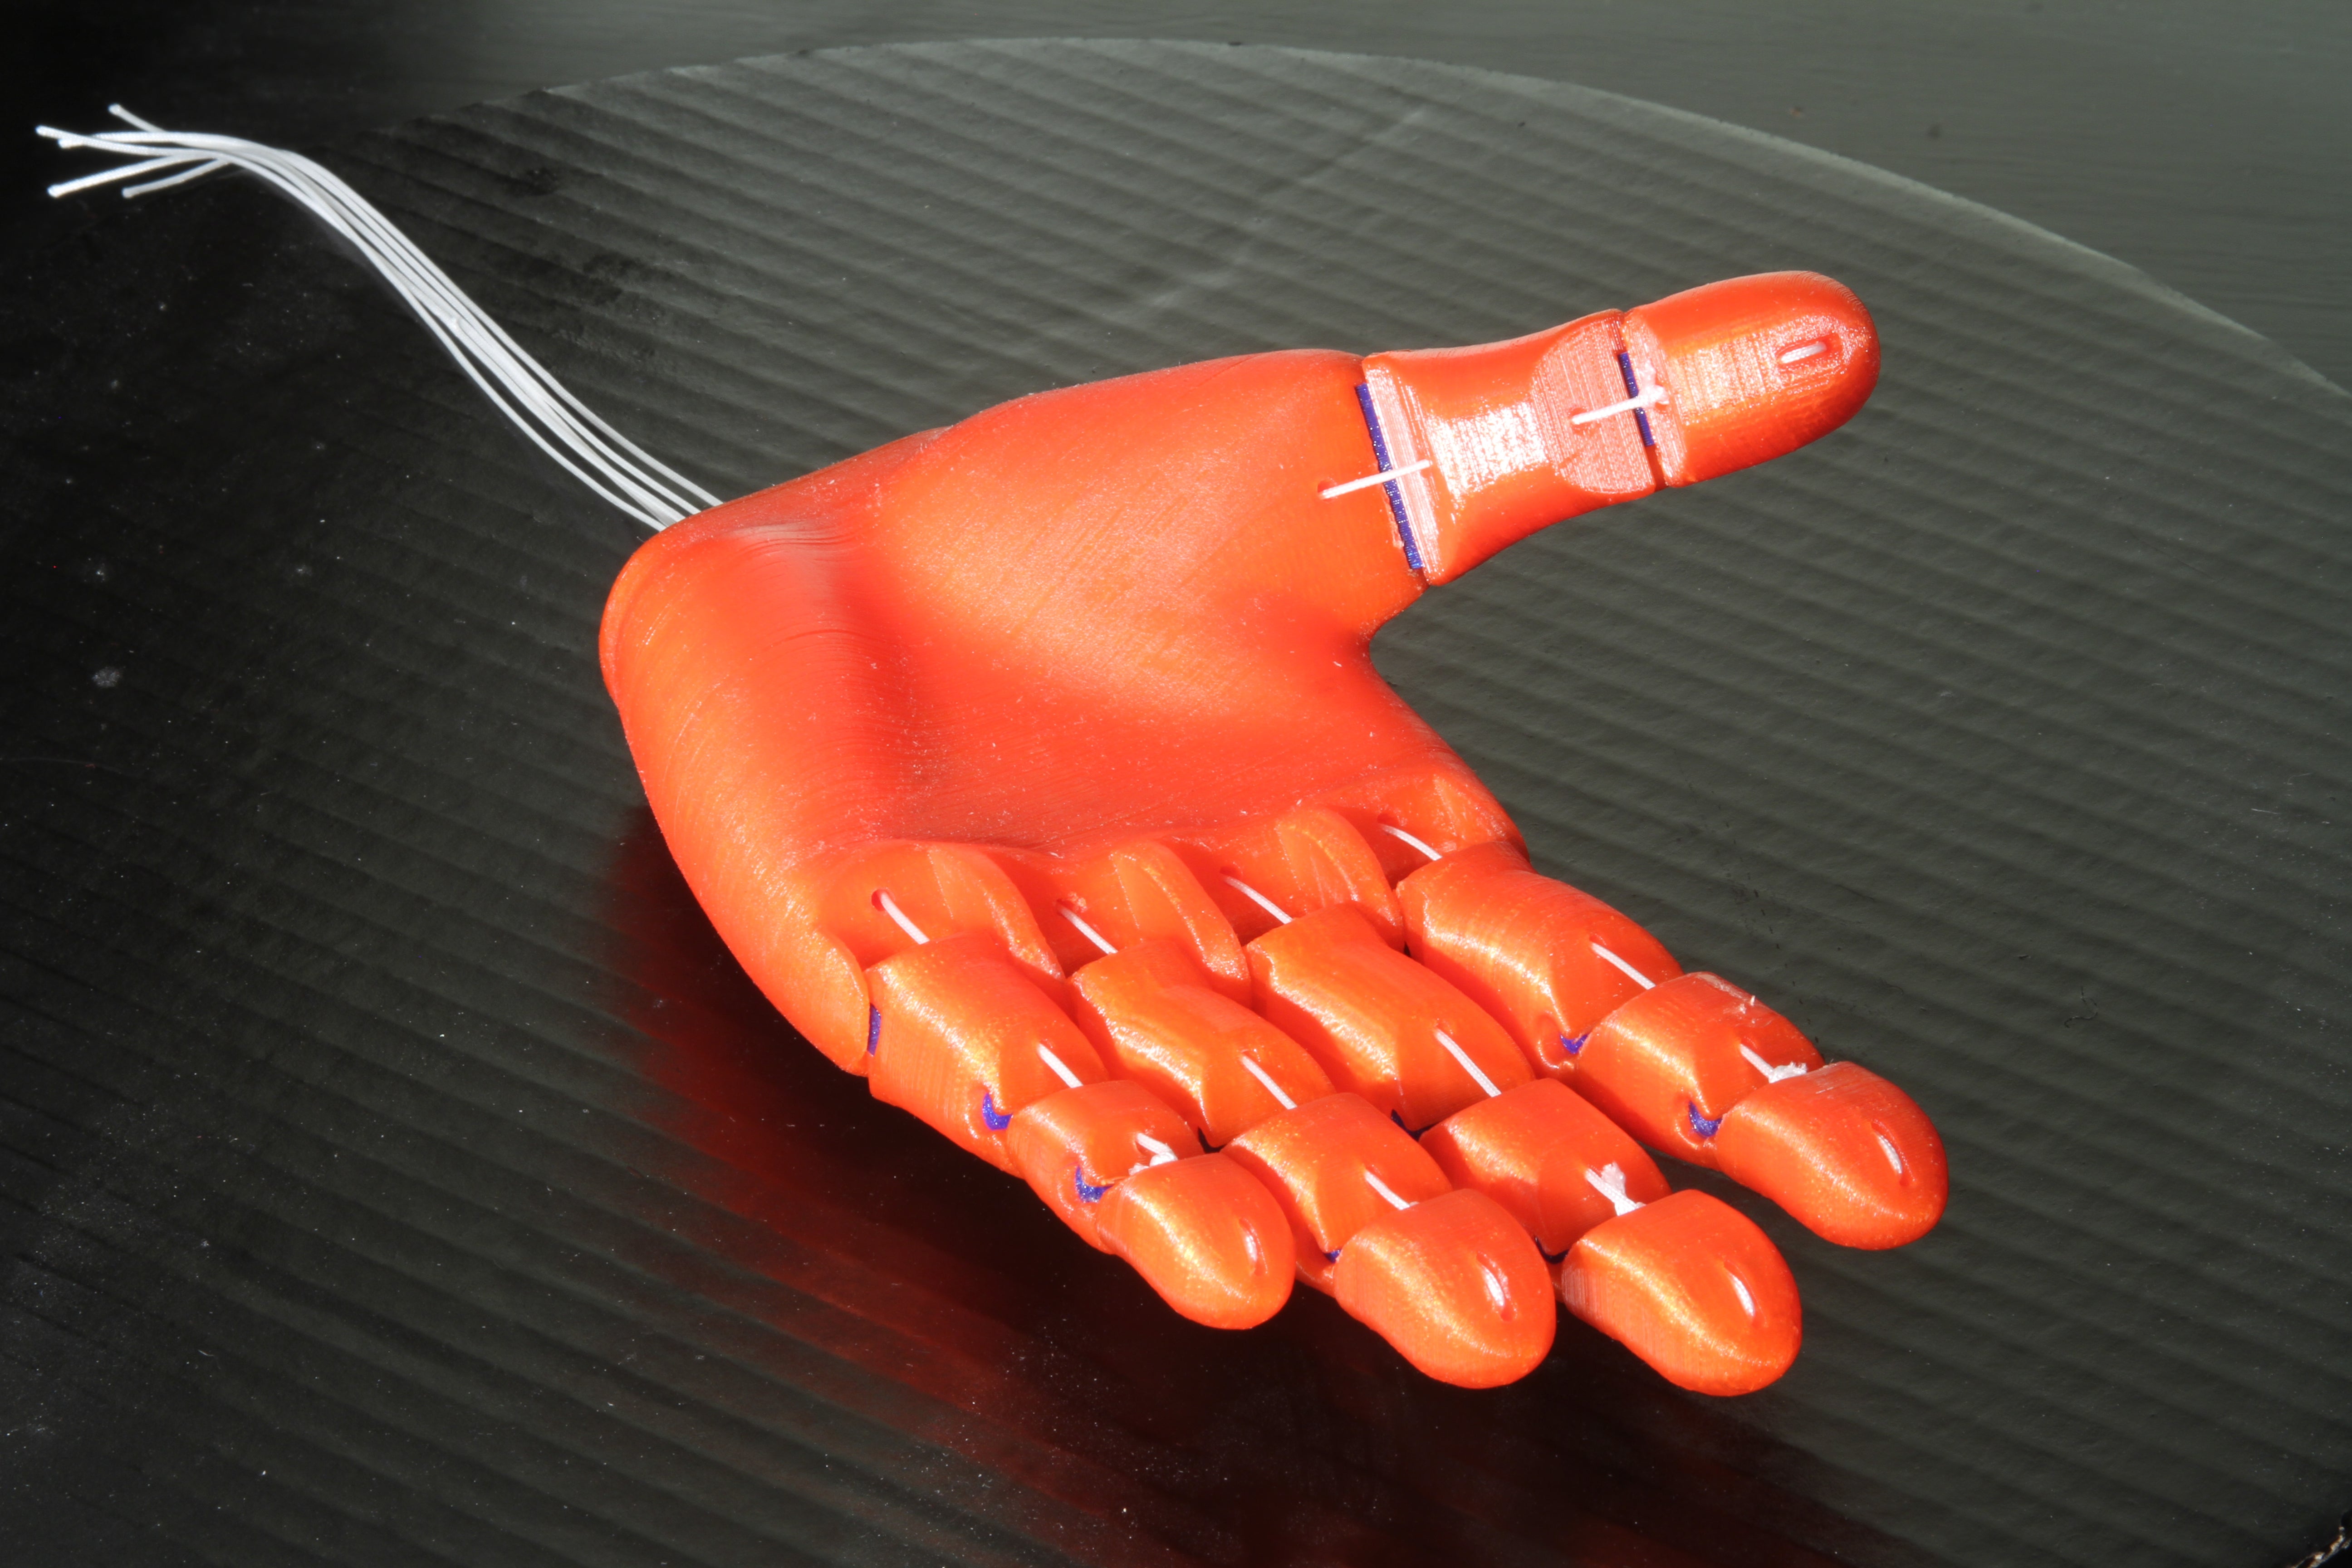 The FlexyHand 3D Printed Prosthesis (Proof of Concept)